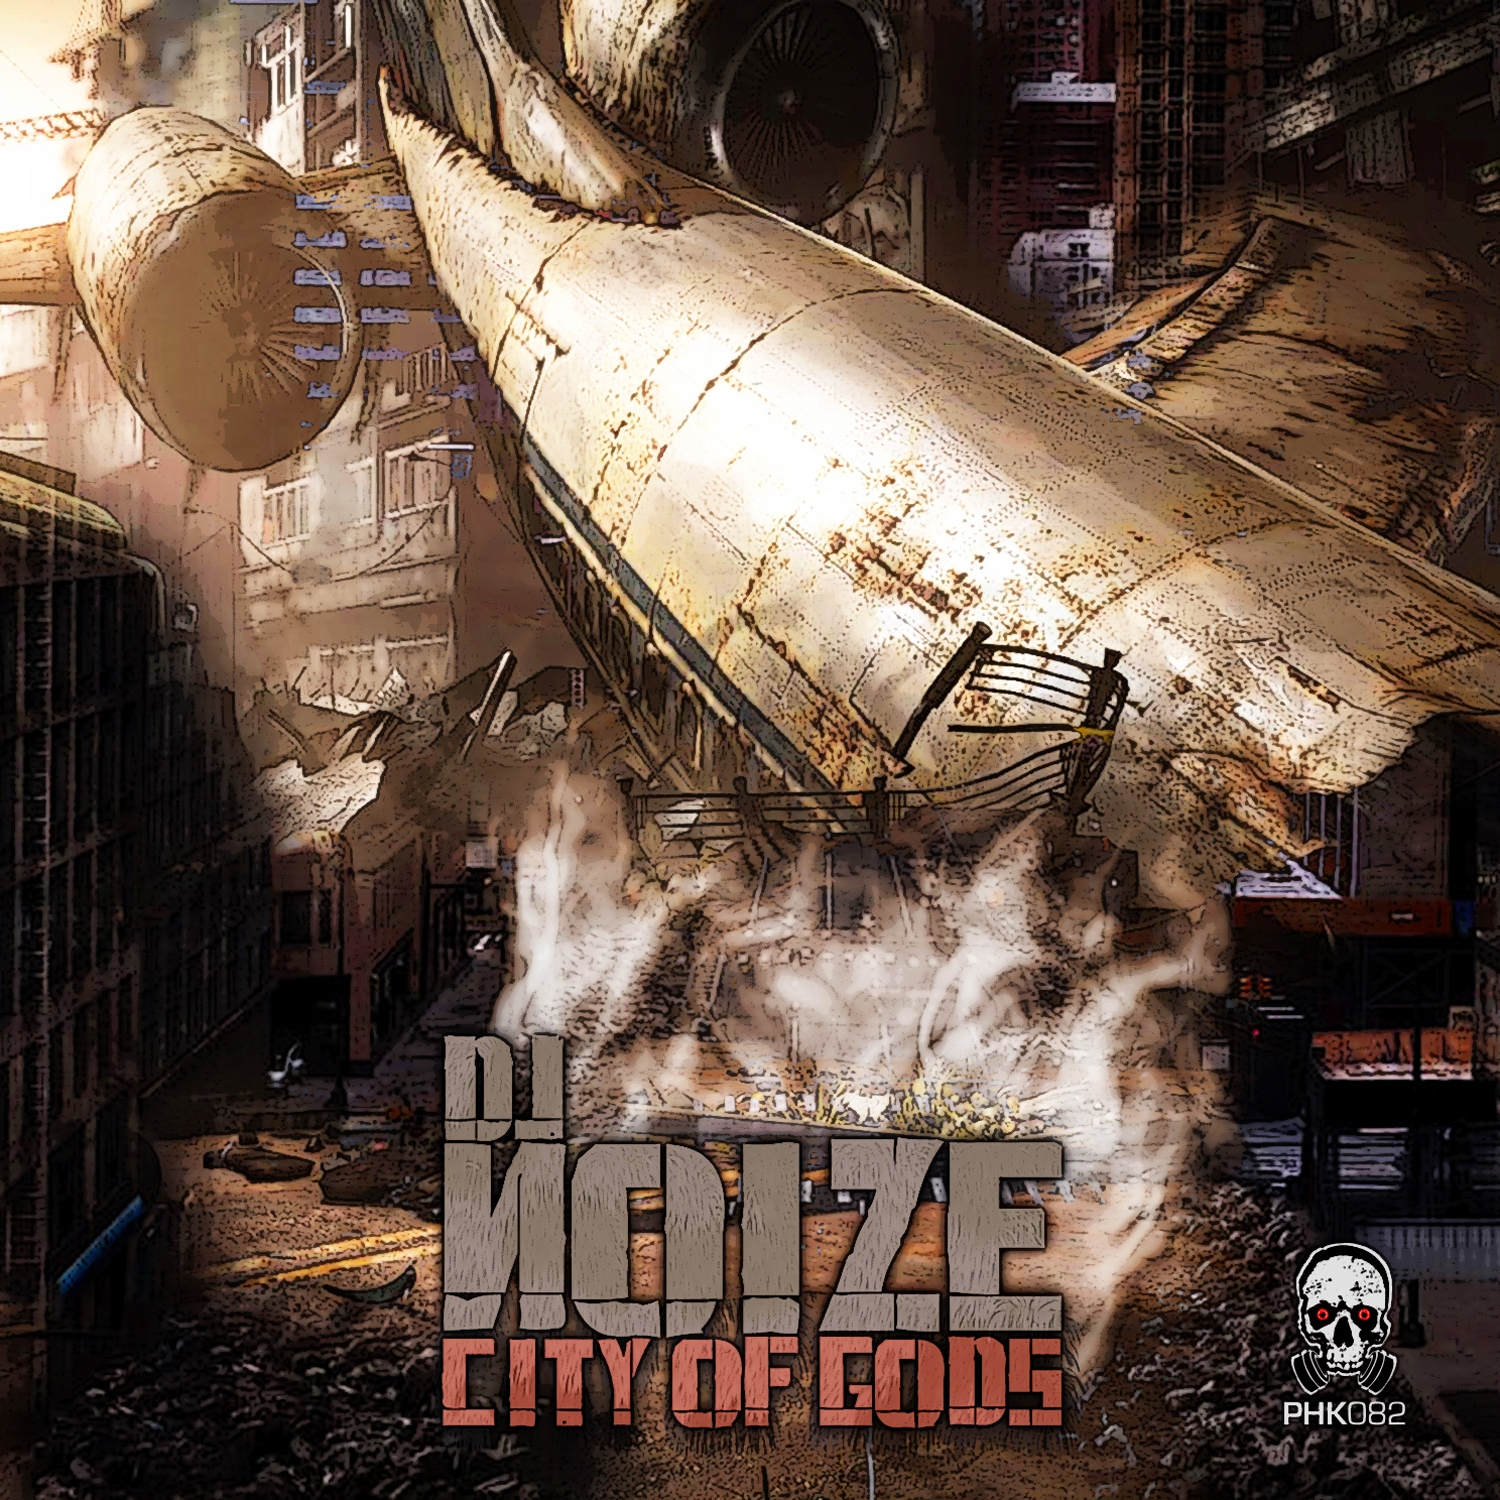 download city of gods mp3